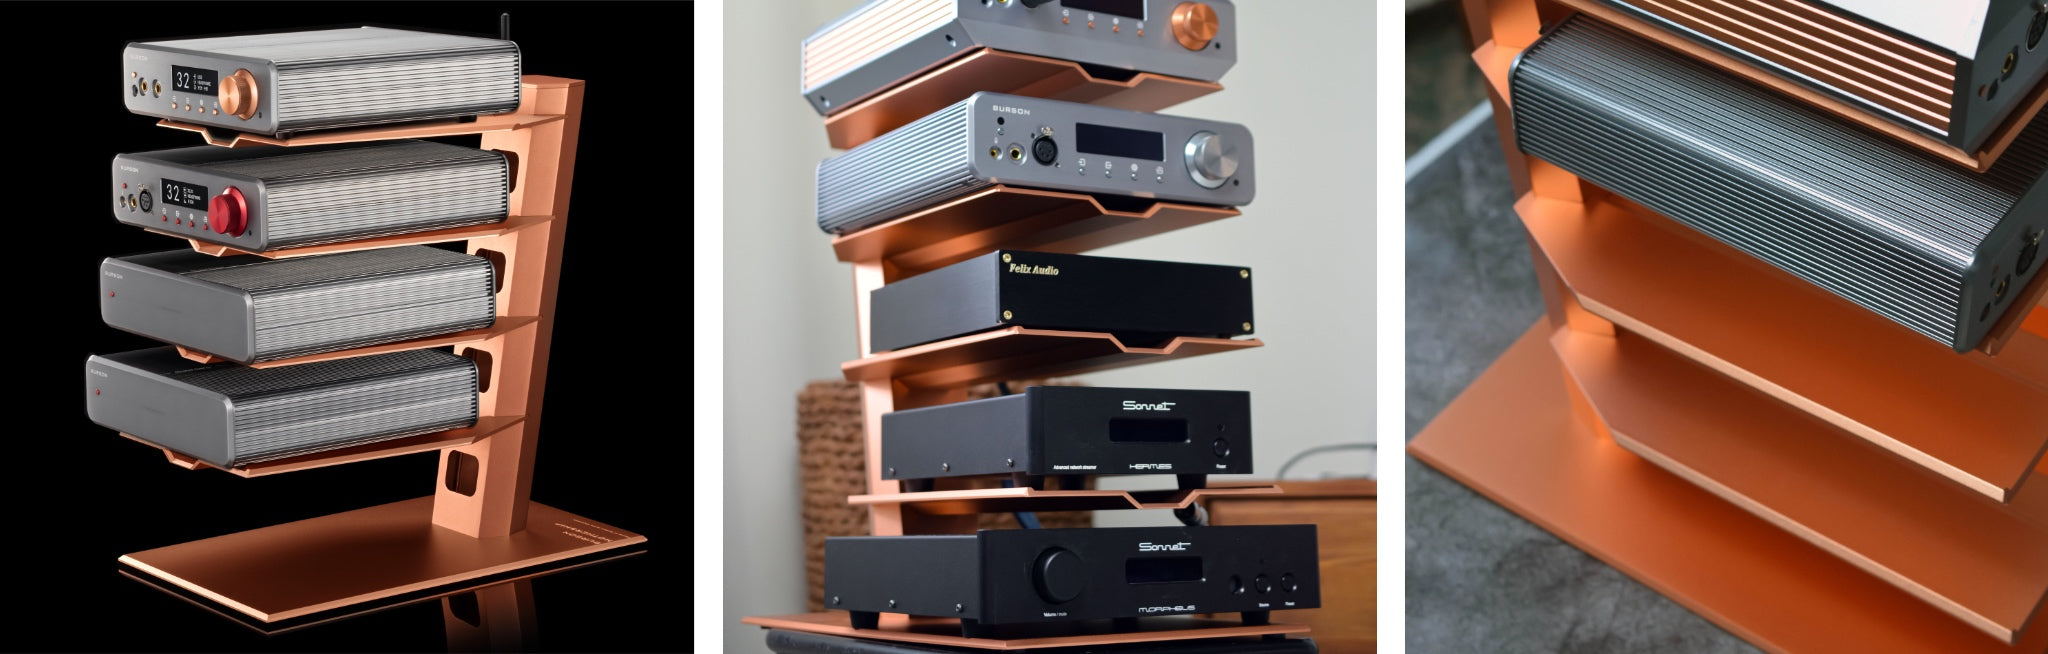 3 thumbnails of Burson Mothership in Copper finish with assorted audio gear on shelves